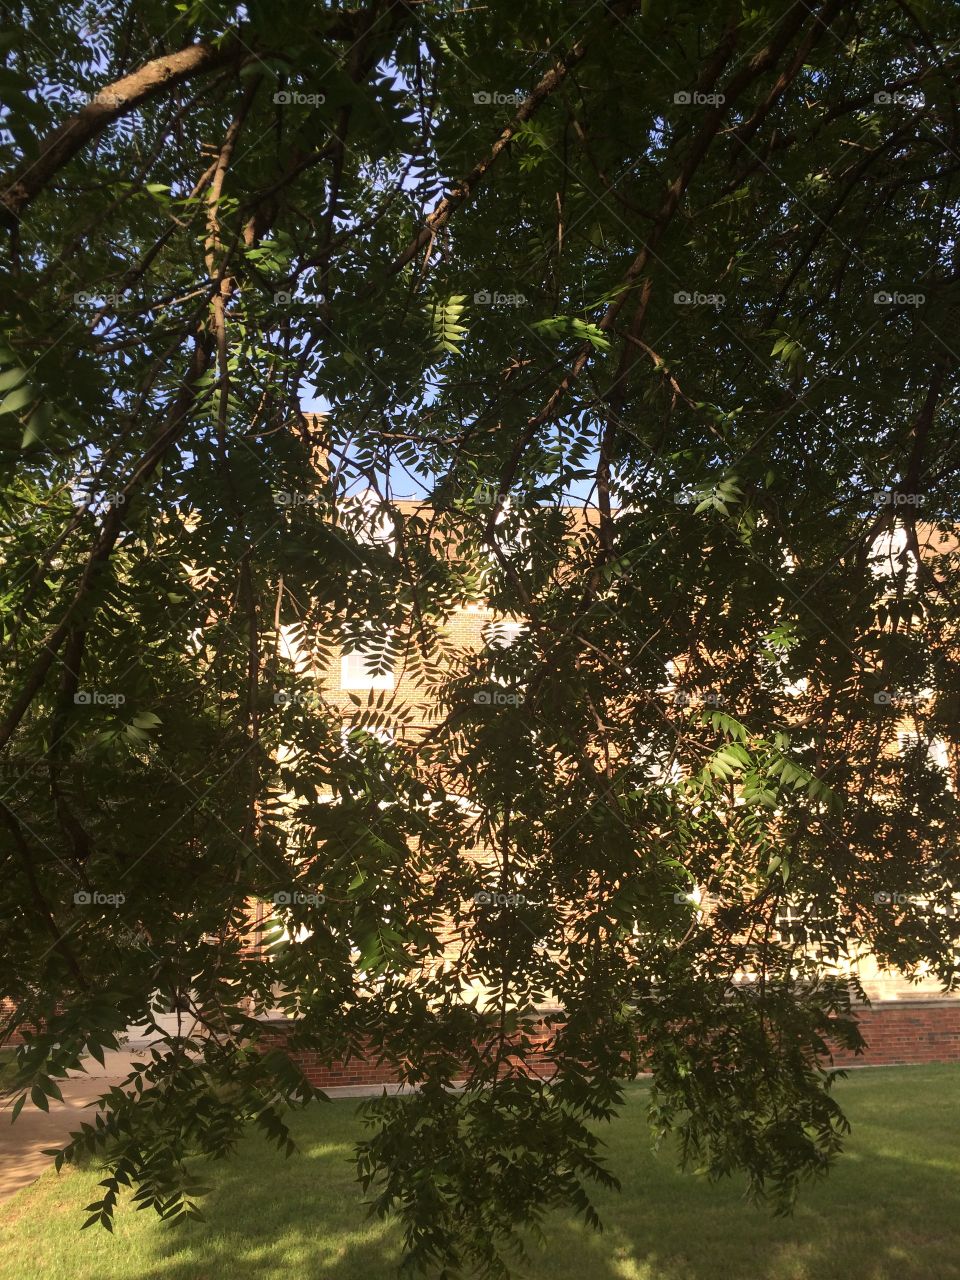 Building through the sunny canopy of a tree